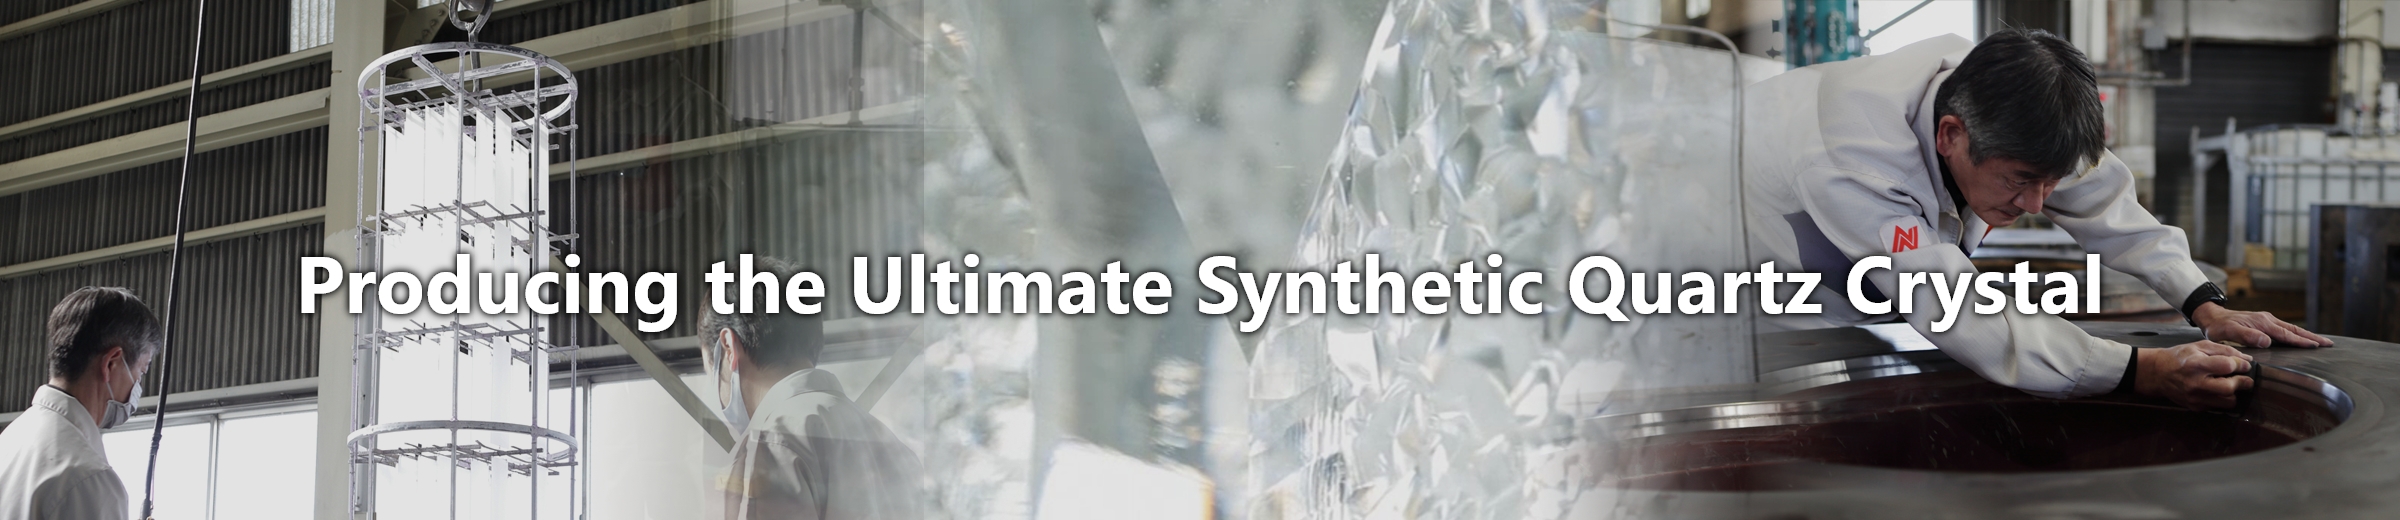 Producing the Ultimate Synthetic Quartz Crystals